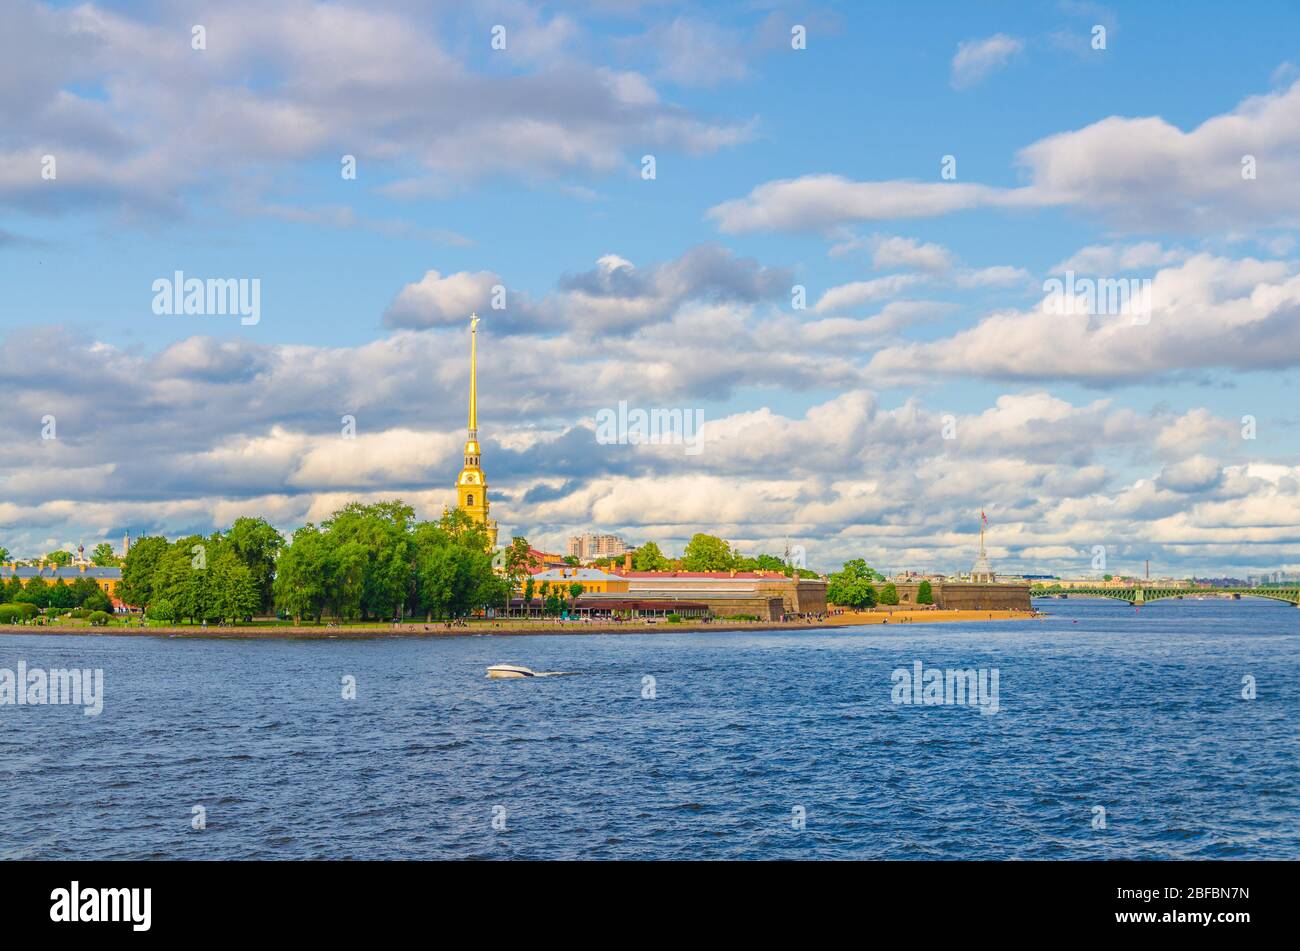 The Peter and Paul Fortress citadel, Saints Peter and Paul Cathedral Orthodox church with gold spire, fortress walls on Zayachy Hare Island, Neva rive Stock Photo